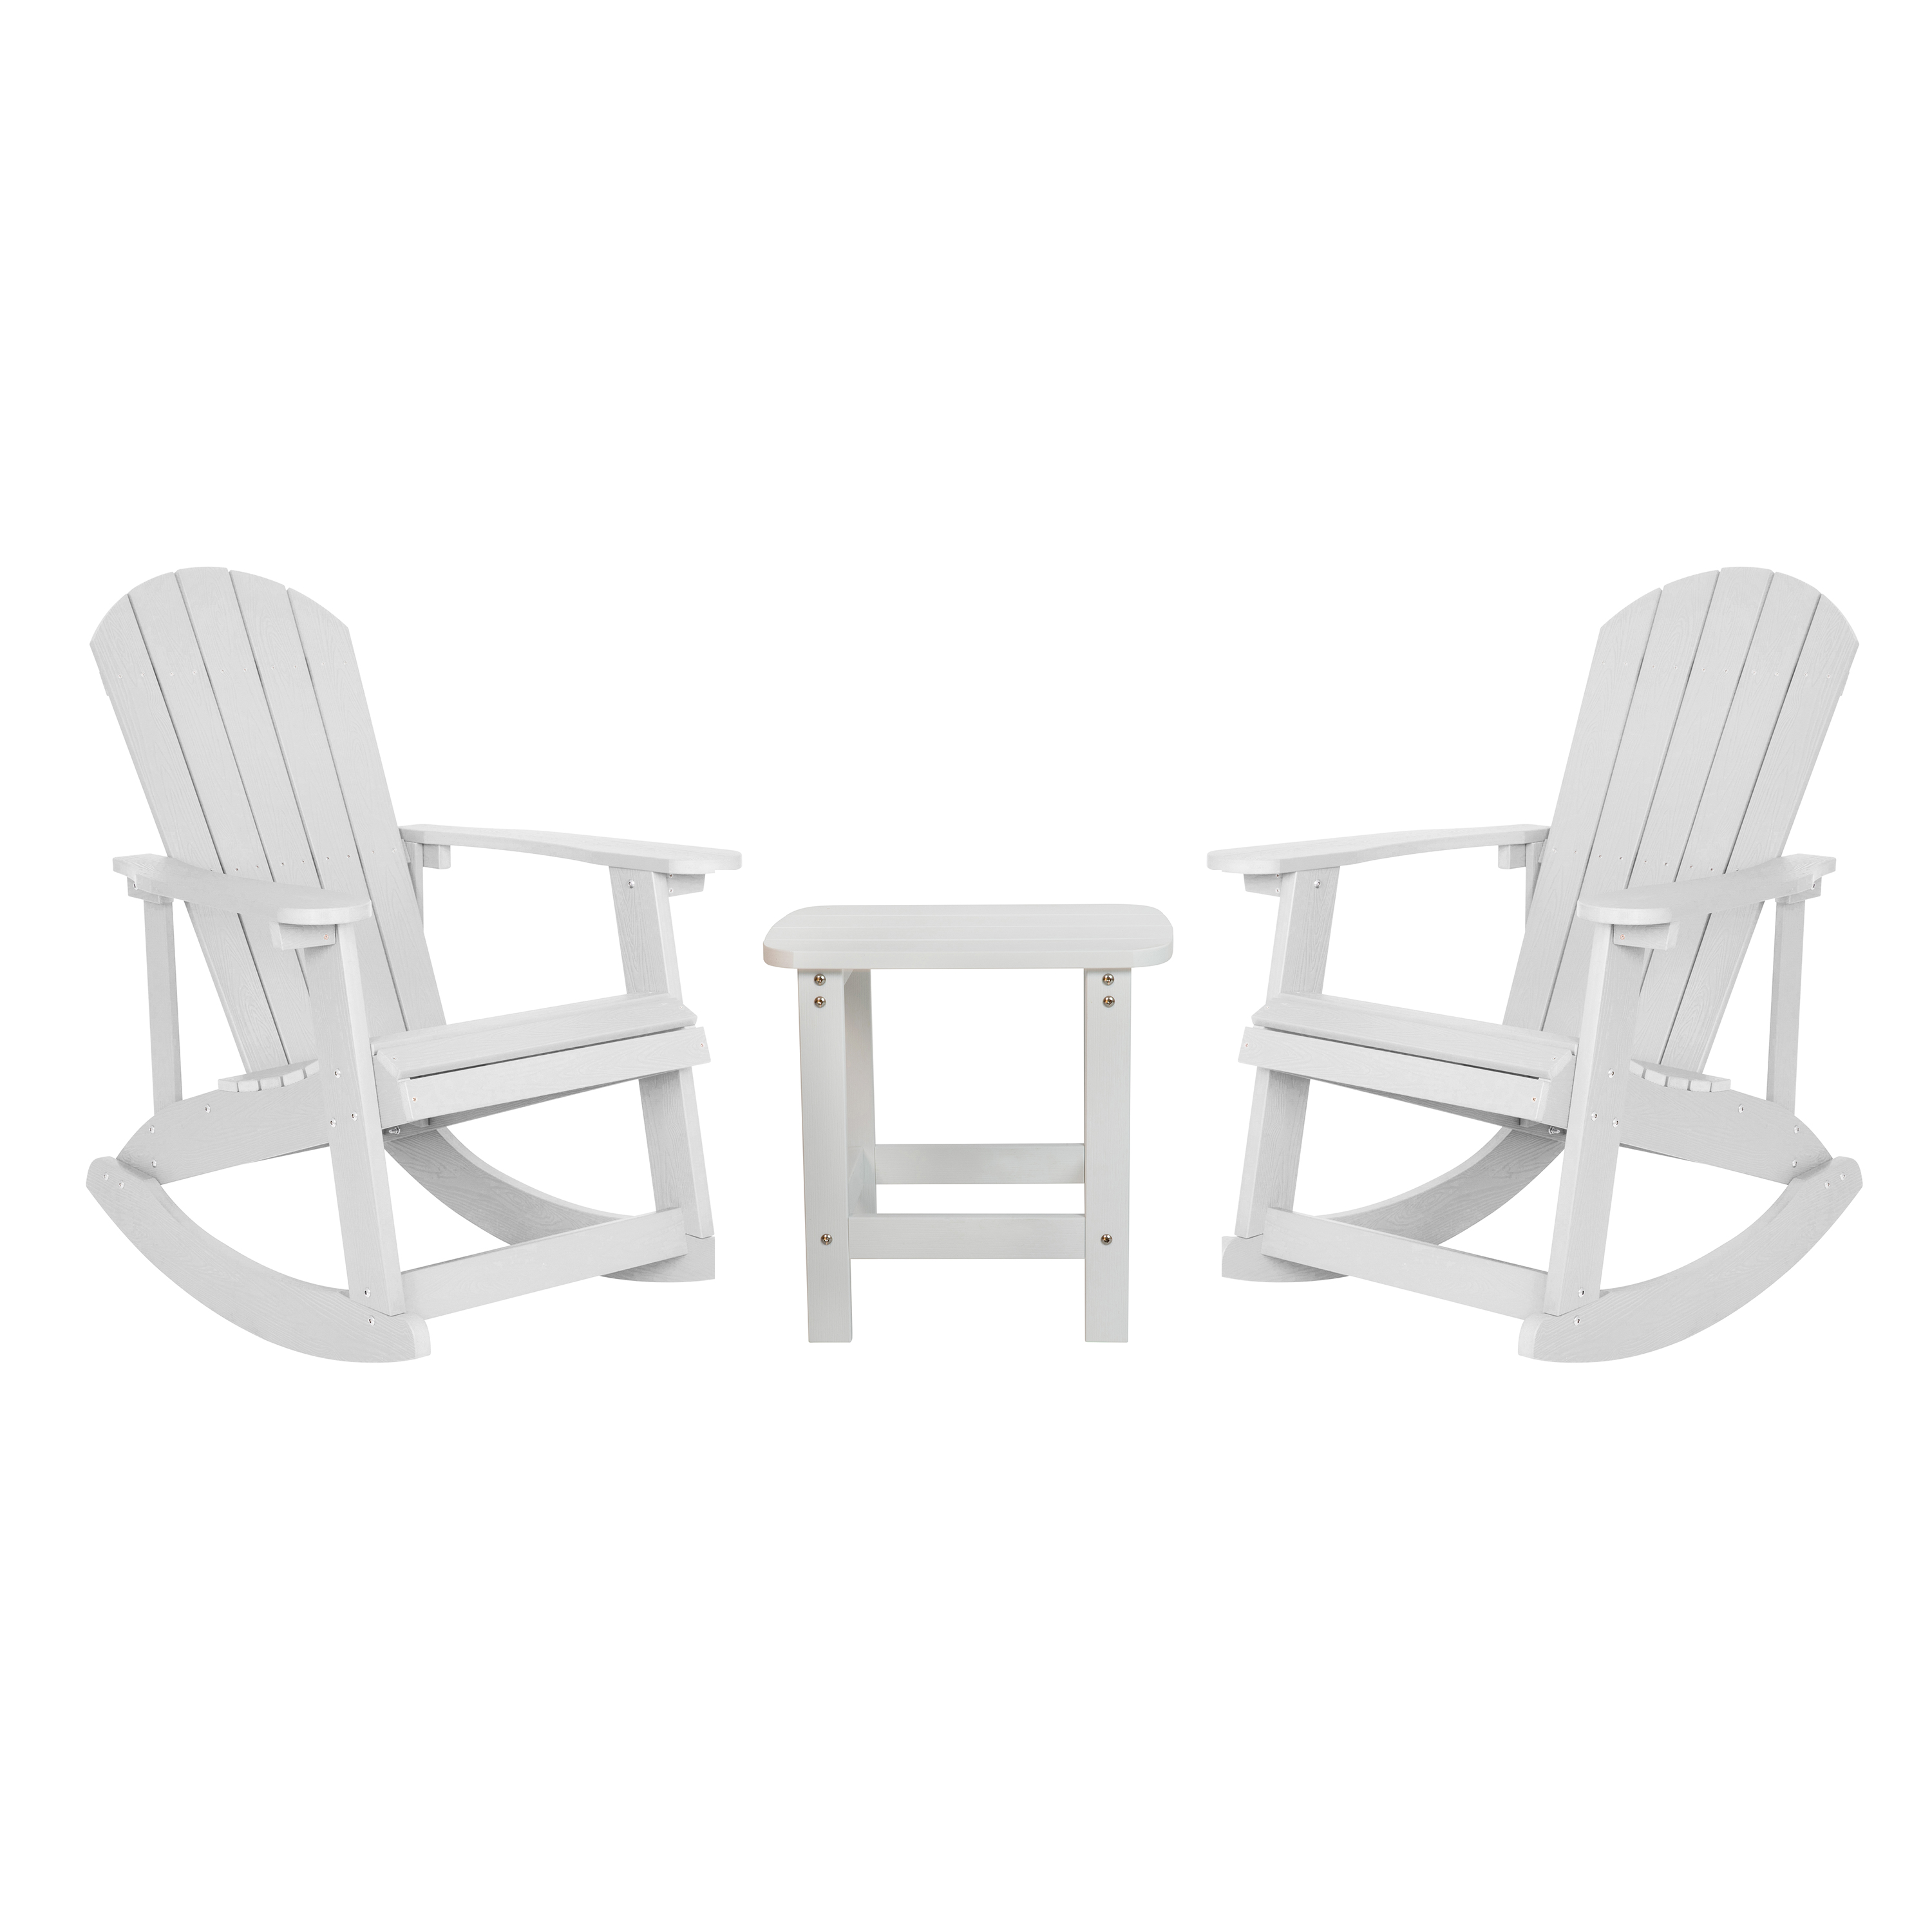 BizChair Set of 2 Commercial Grade All-Weather Poly Resin Wood Adirondack Rocking Chairs with Side Table in White - image 2 of 12